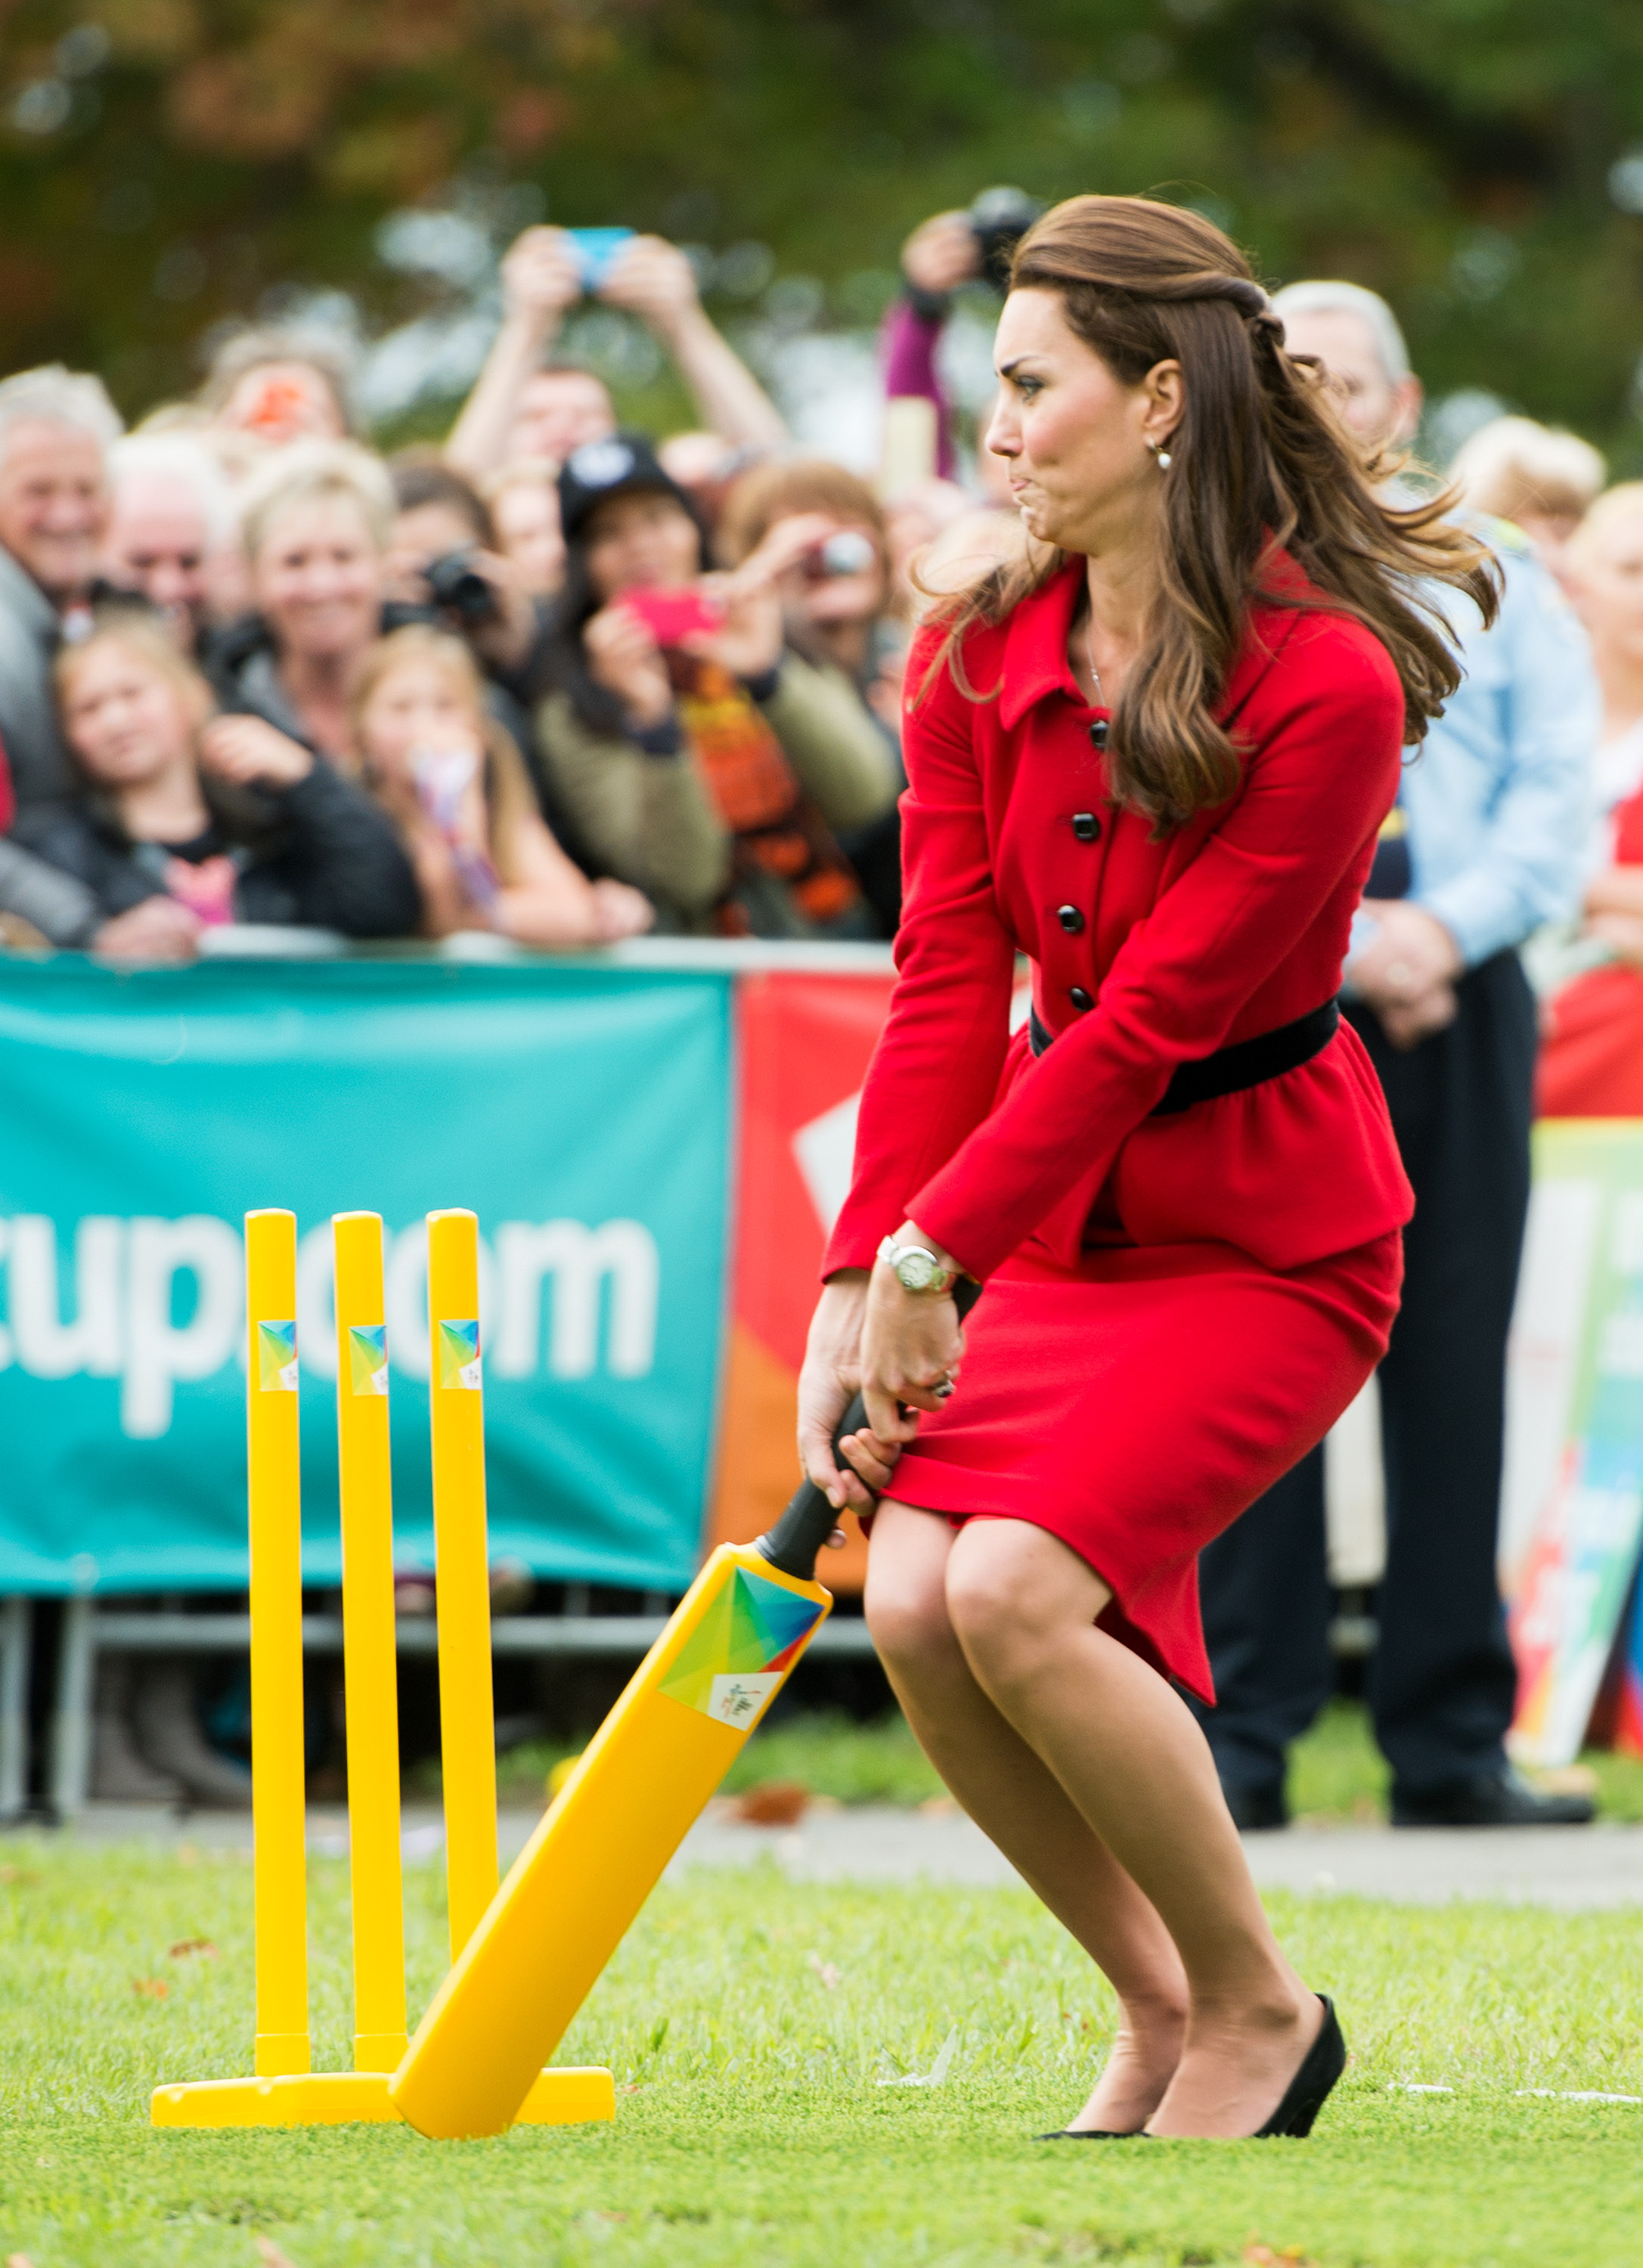 CHRISTCHURCH, NEW ZEALAND - APRIL 14: Catherine, Duchess of Cambridge bats during a game of cricket in Latimer Square on April 14, 2014 in Christchurch, New Zealand. The Duke and Duchess of Cambridge are on a three-week tour of Australia and New Zealand, the first official trip overseas with their son, Prince George of Cambridge. (Photo by Samir Hussein/WireImage) (Samir Hussein—WireImage)